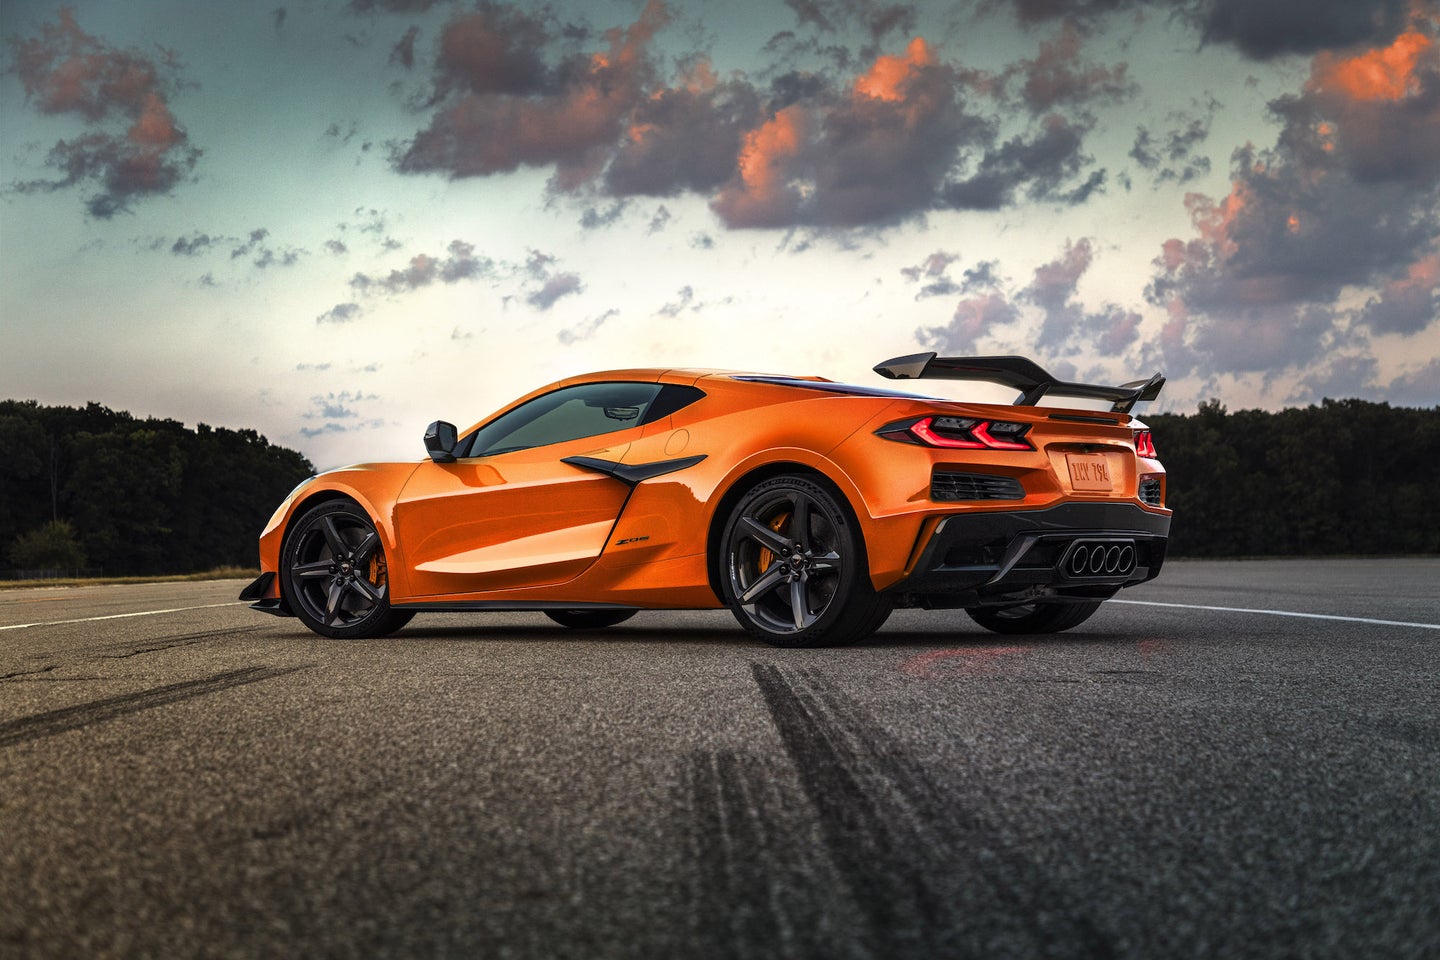 The 2023 Chevrolet Corvette Z06. General Motors said earlier this week that they're going to release Corvettes that are both electrified, and electric.